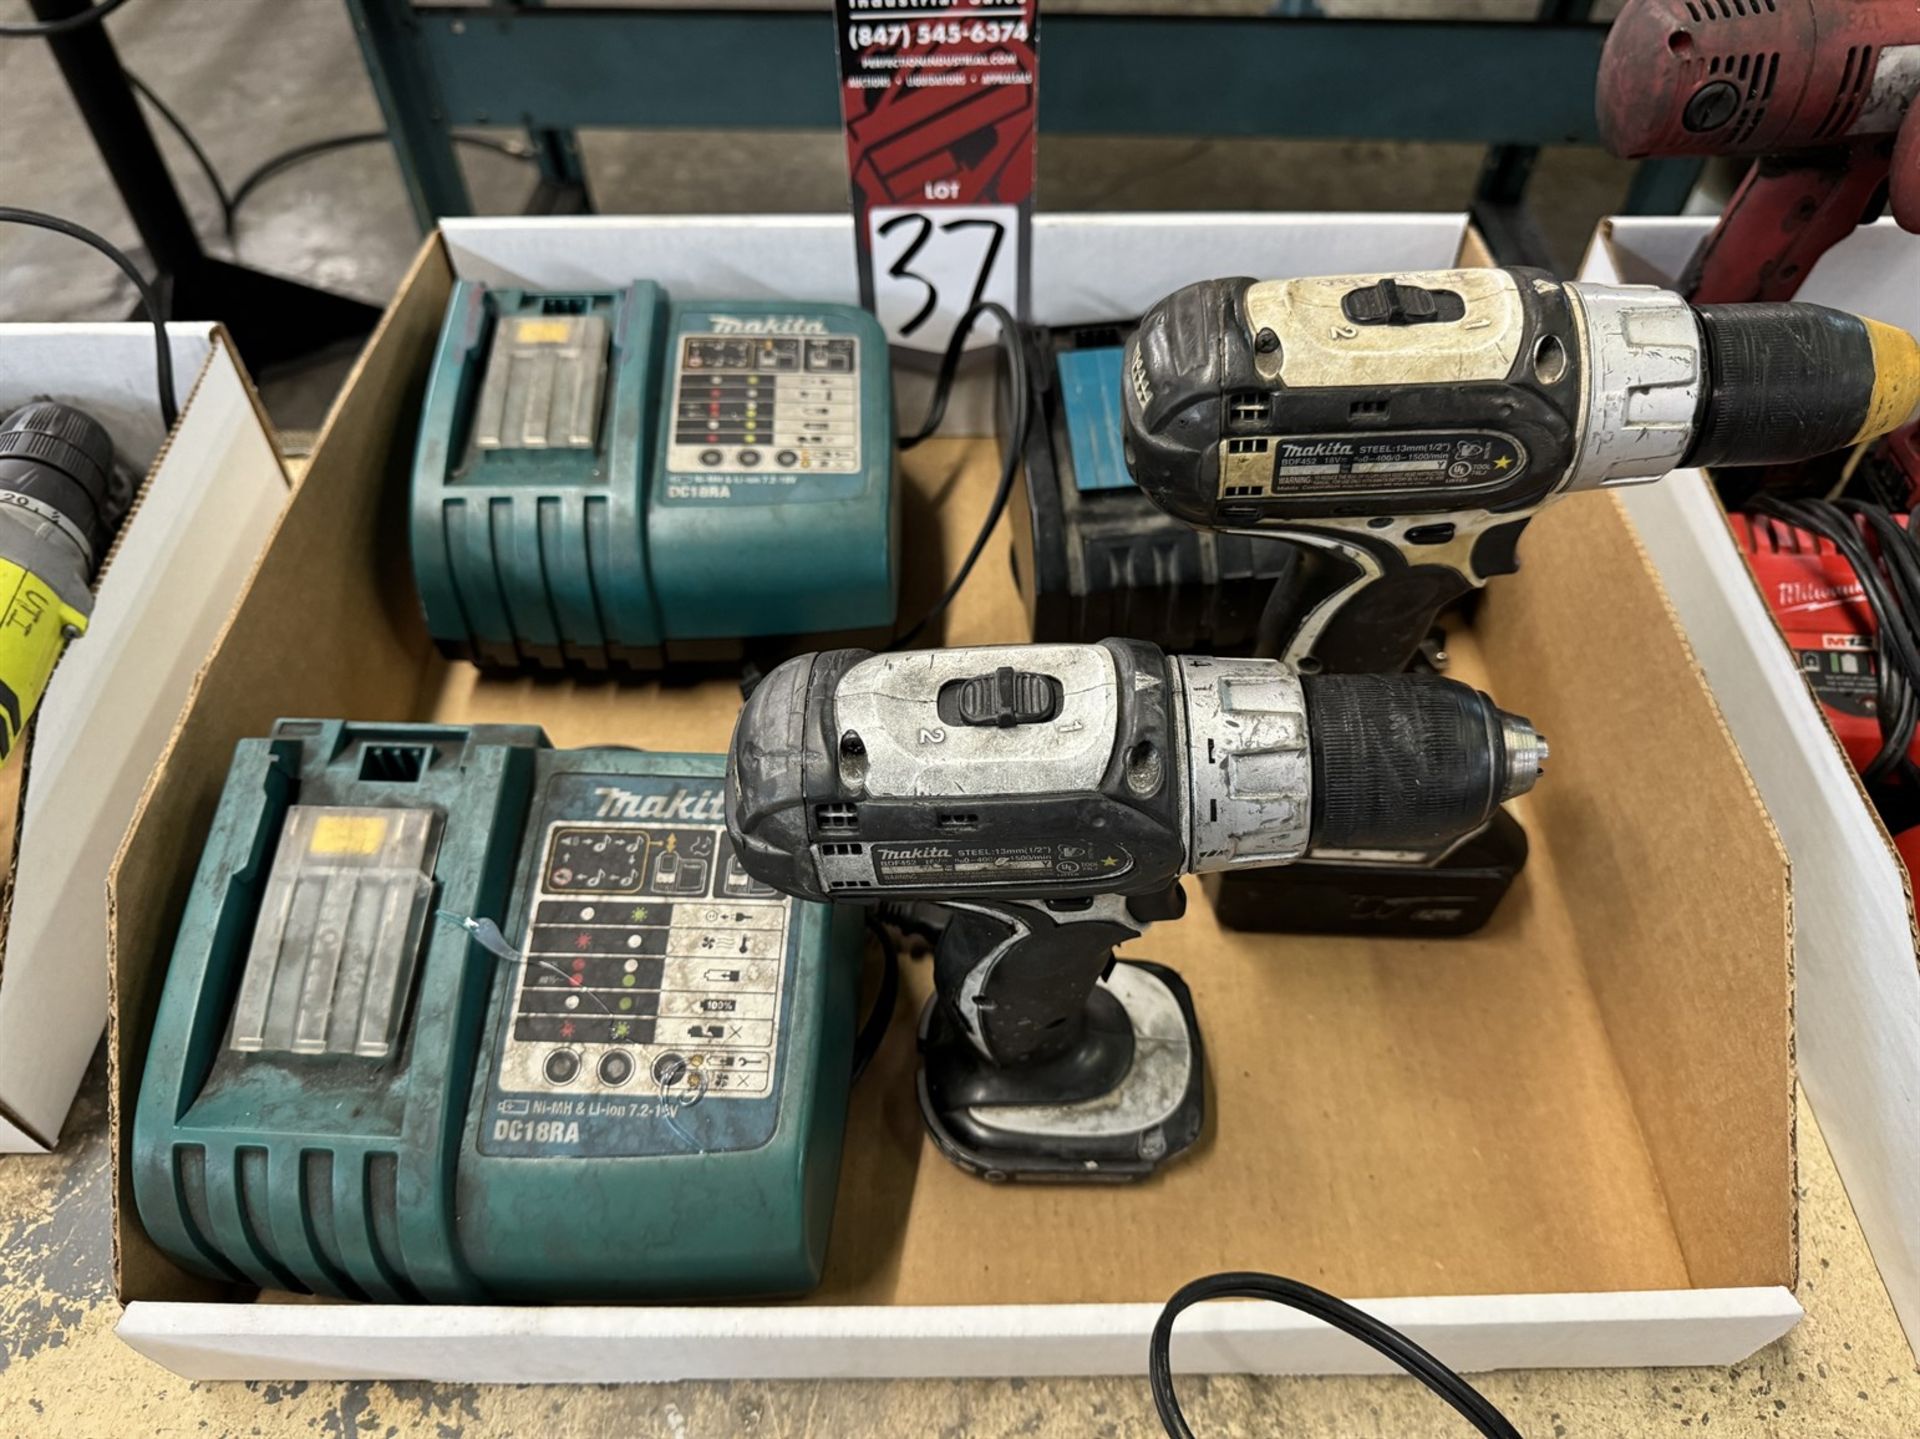 Lot Comprising (2) MAKITA BDF452 1/2" Cordless Drills w/ Batteries and Chargers (Machine Shop)